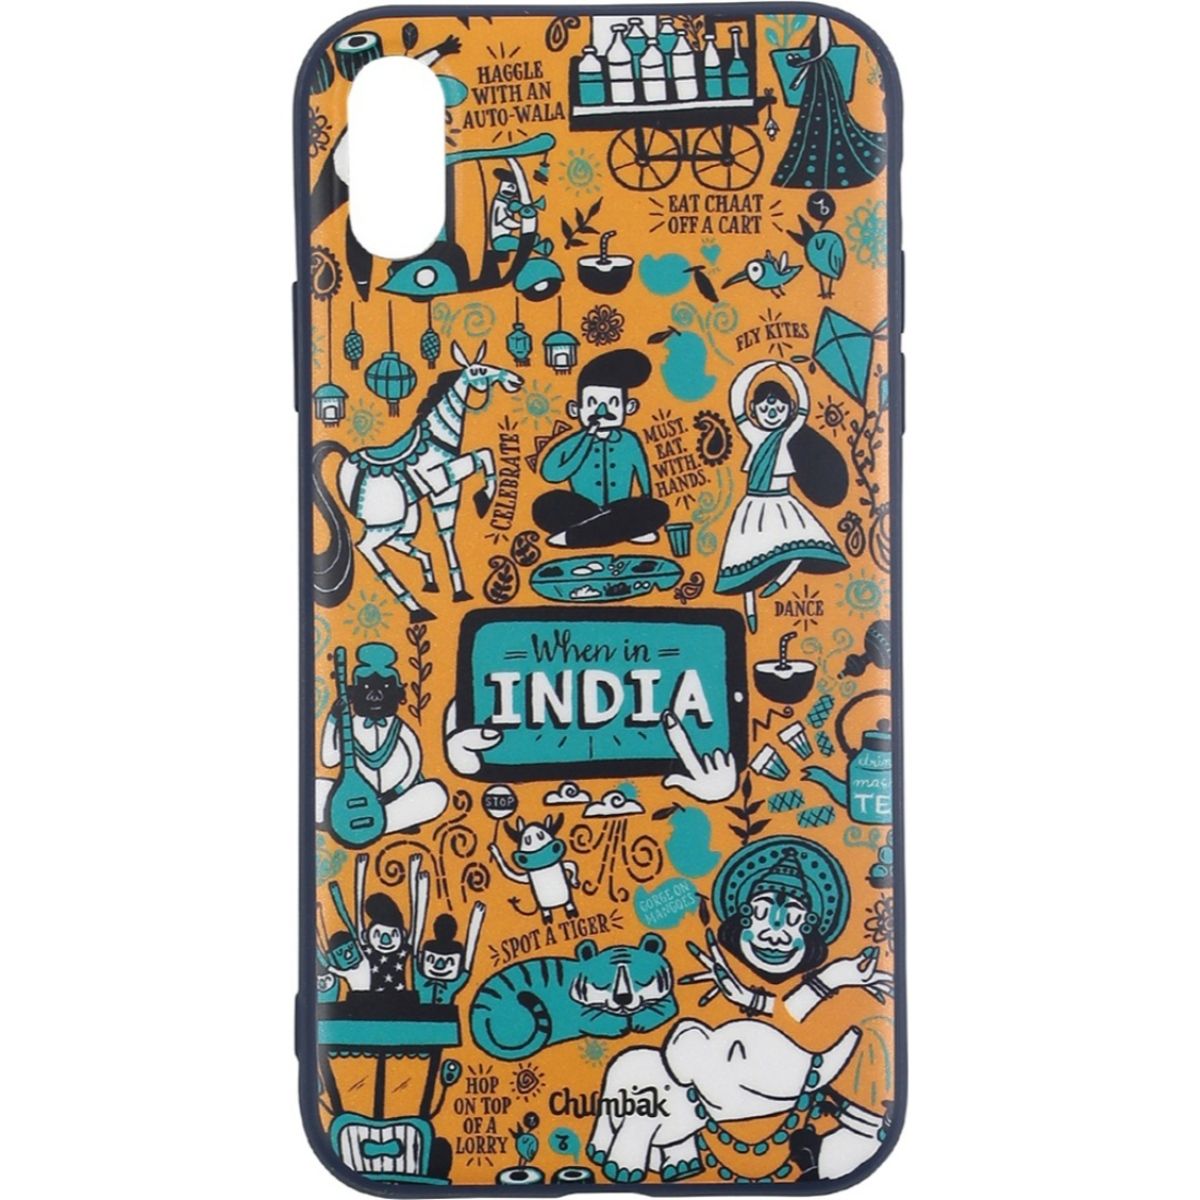 Chumbak When In India Iphone Xr Case: Buy Chumbak When In India Iphone Xr  Case Online at Best Price in India | Nykaa